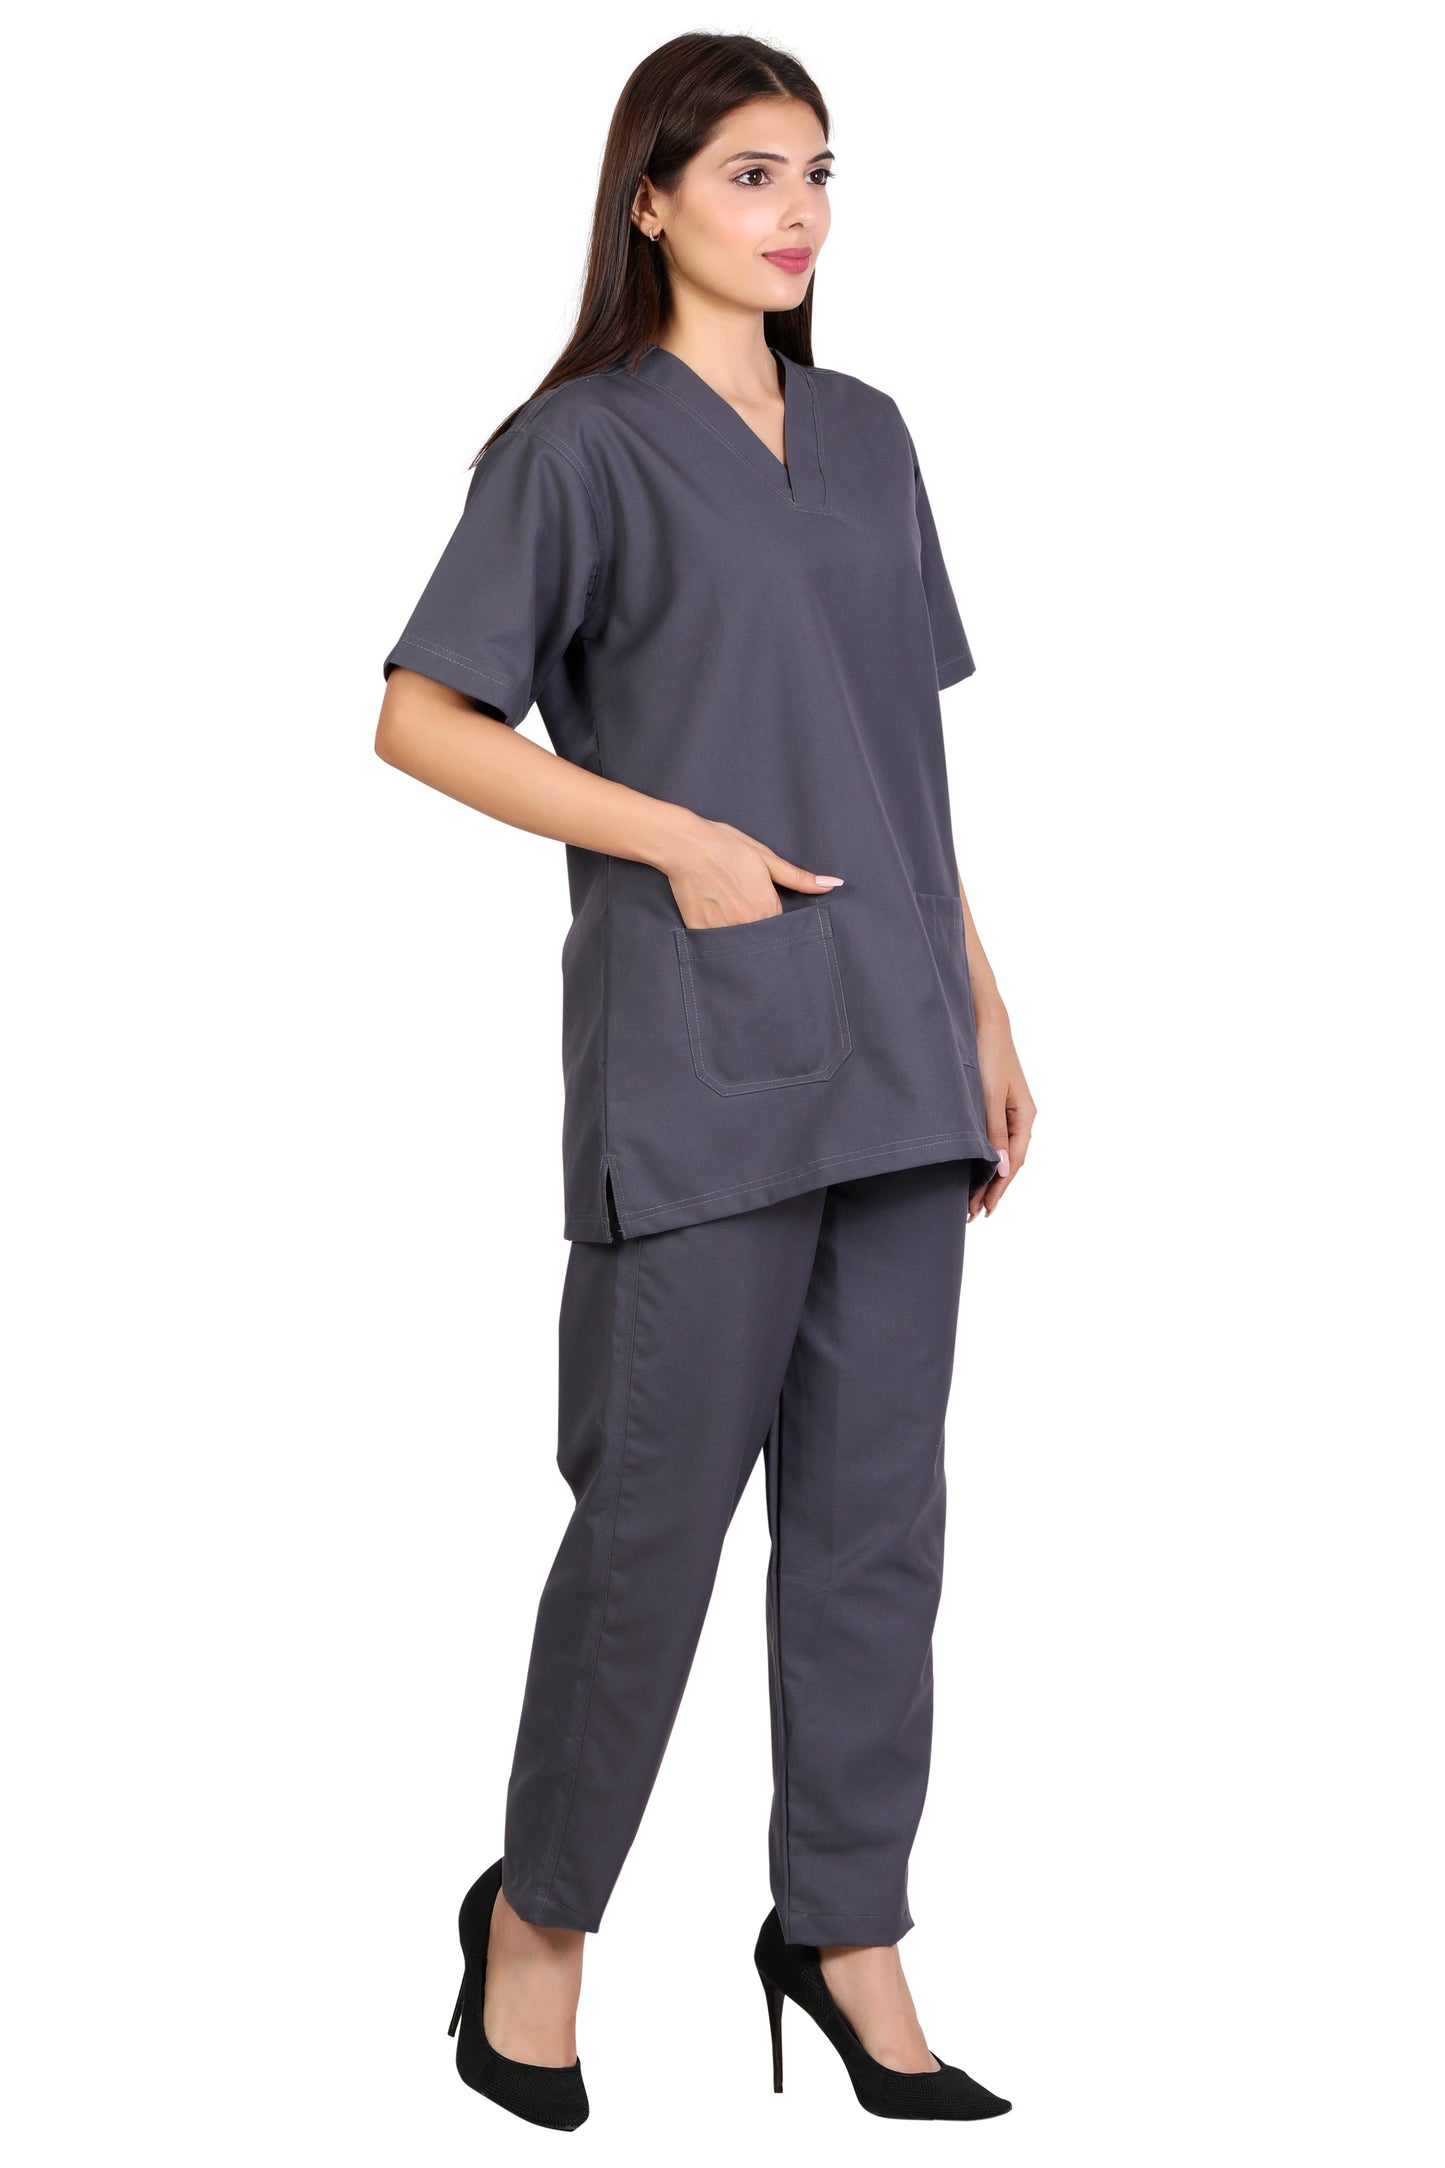 The Ultimate Surgical Scrub Suit Spectrum - Grey